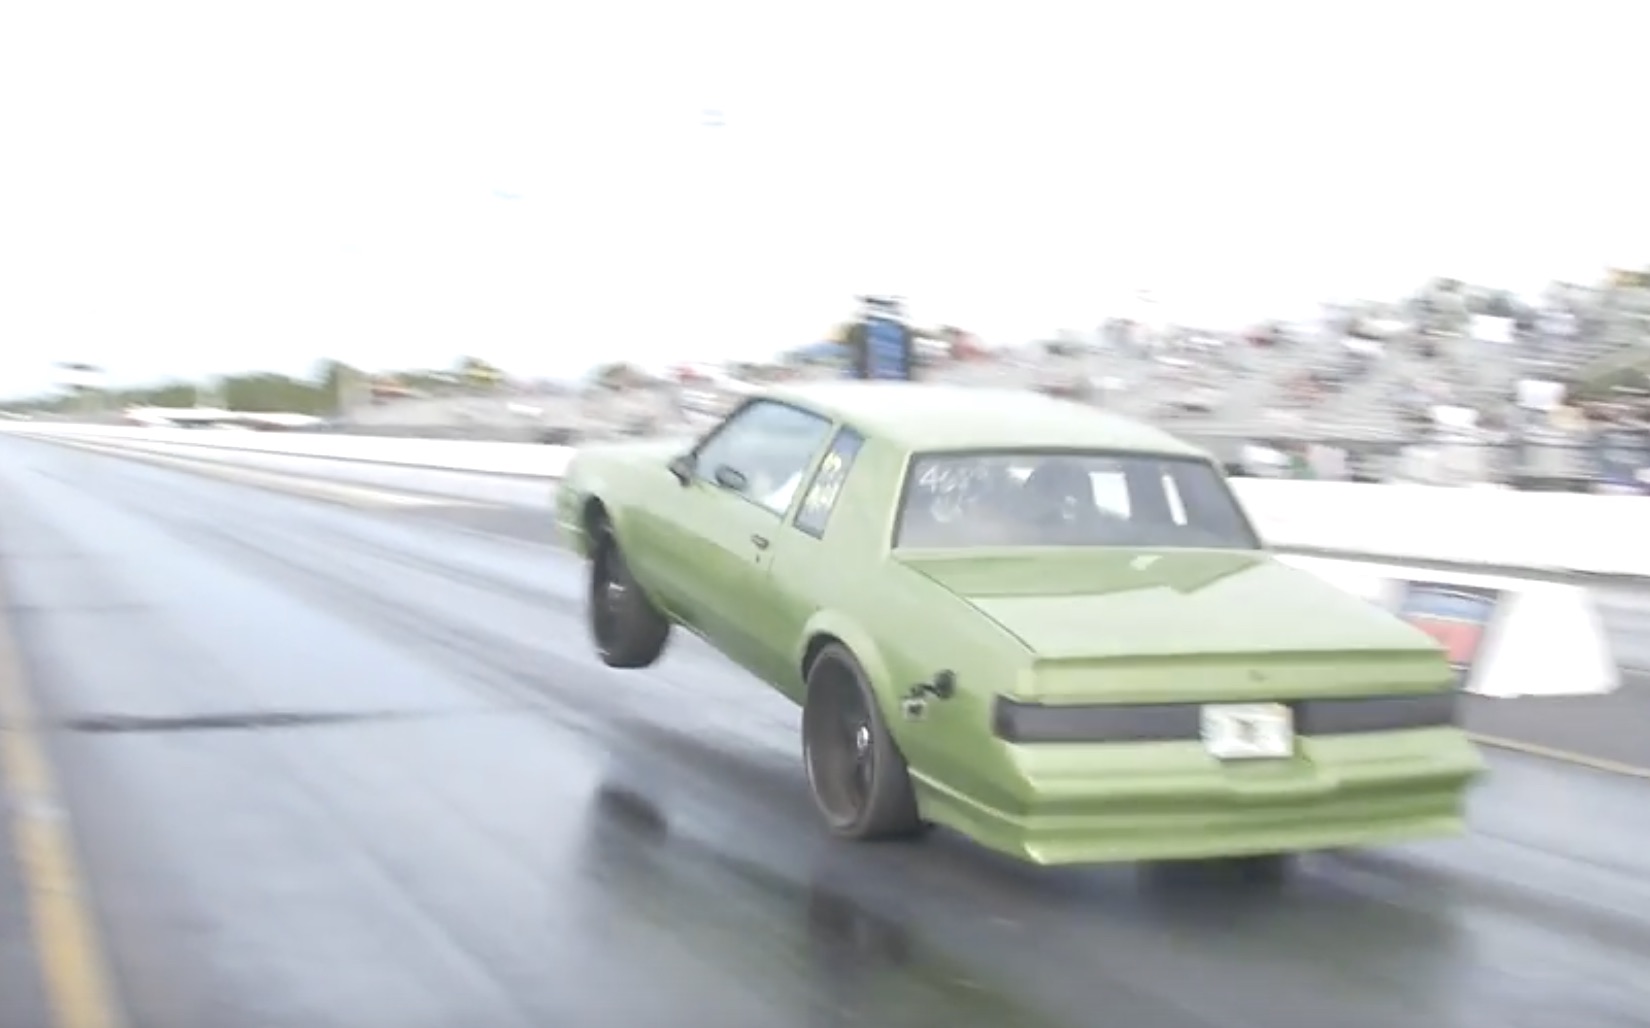 Wheels-Up Launches On Twenty-Twos: This Green Regal Has Torque!